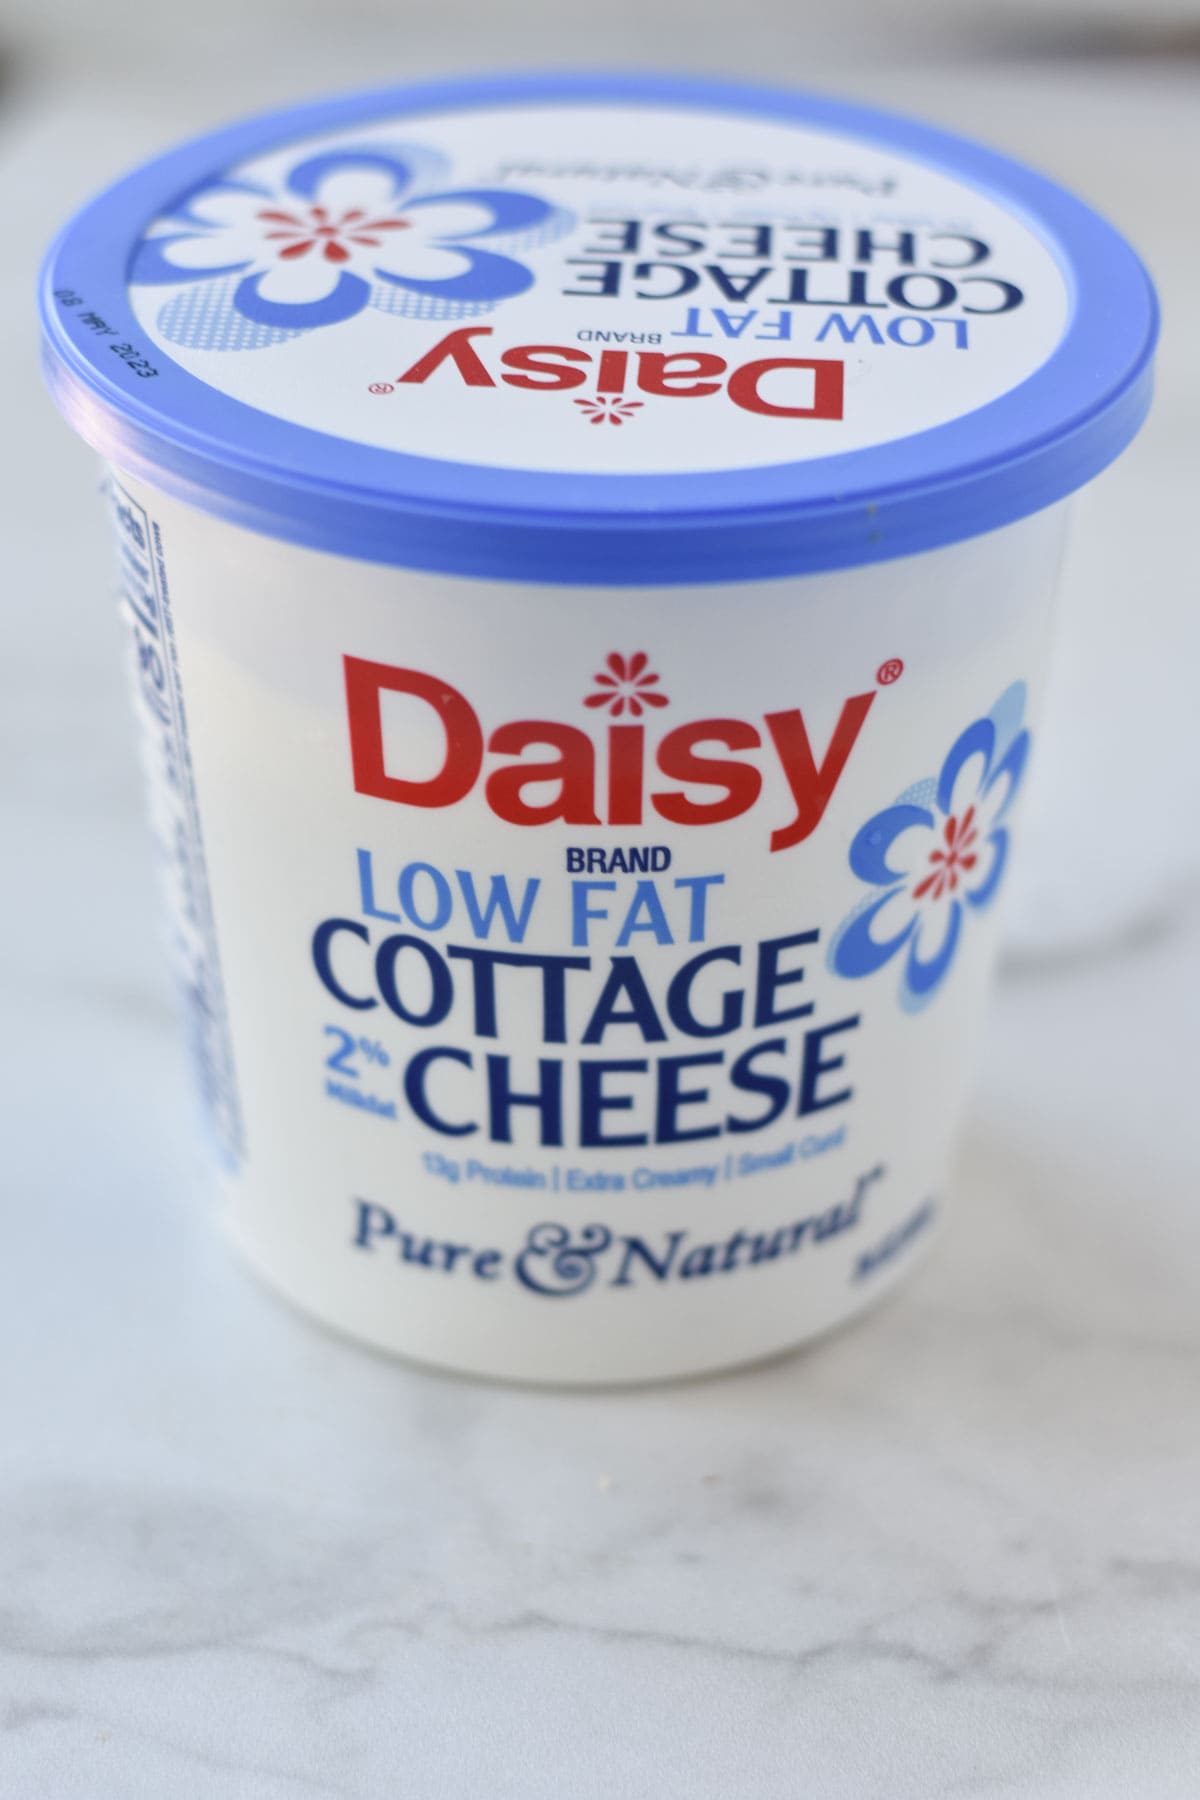 Daisy low fat cottage cheese in a container.